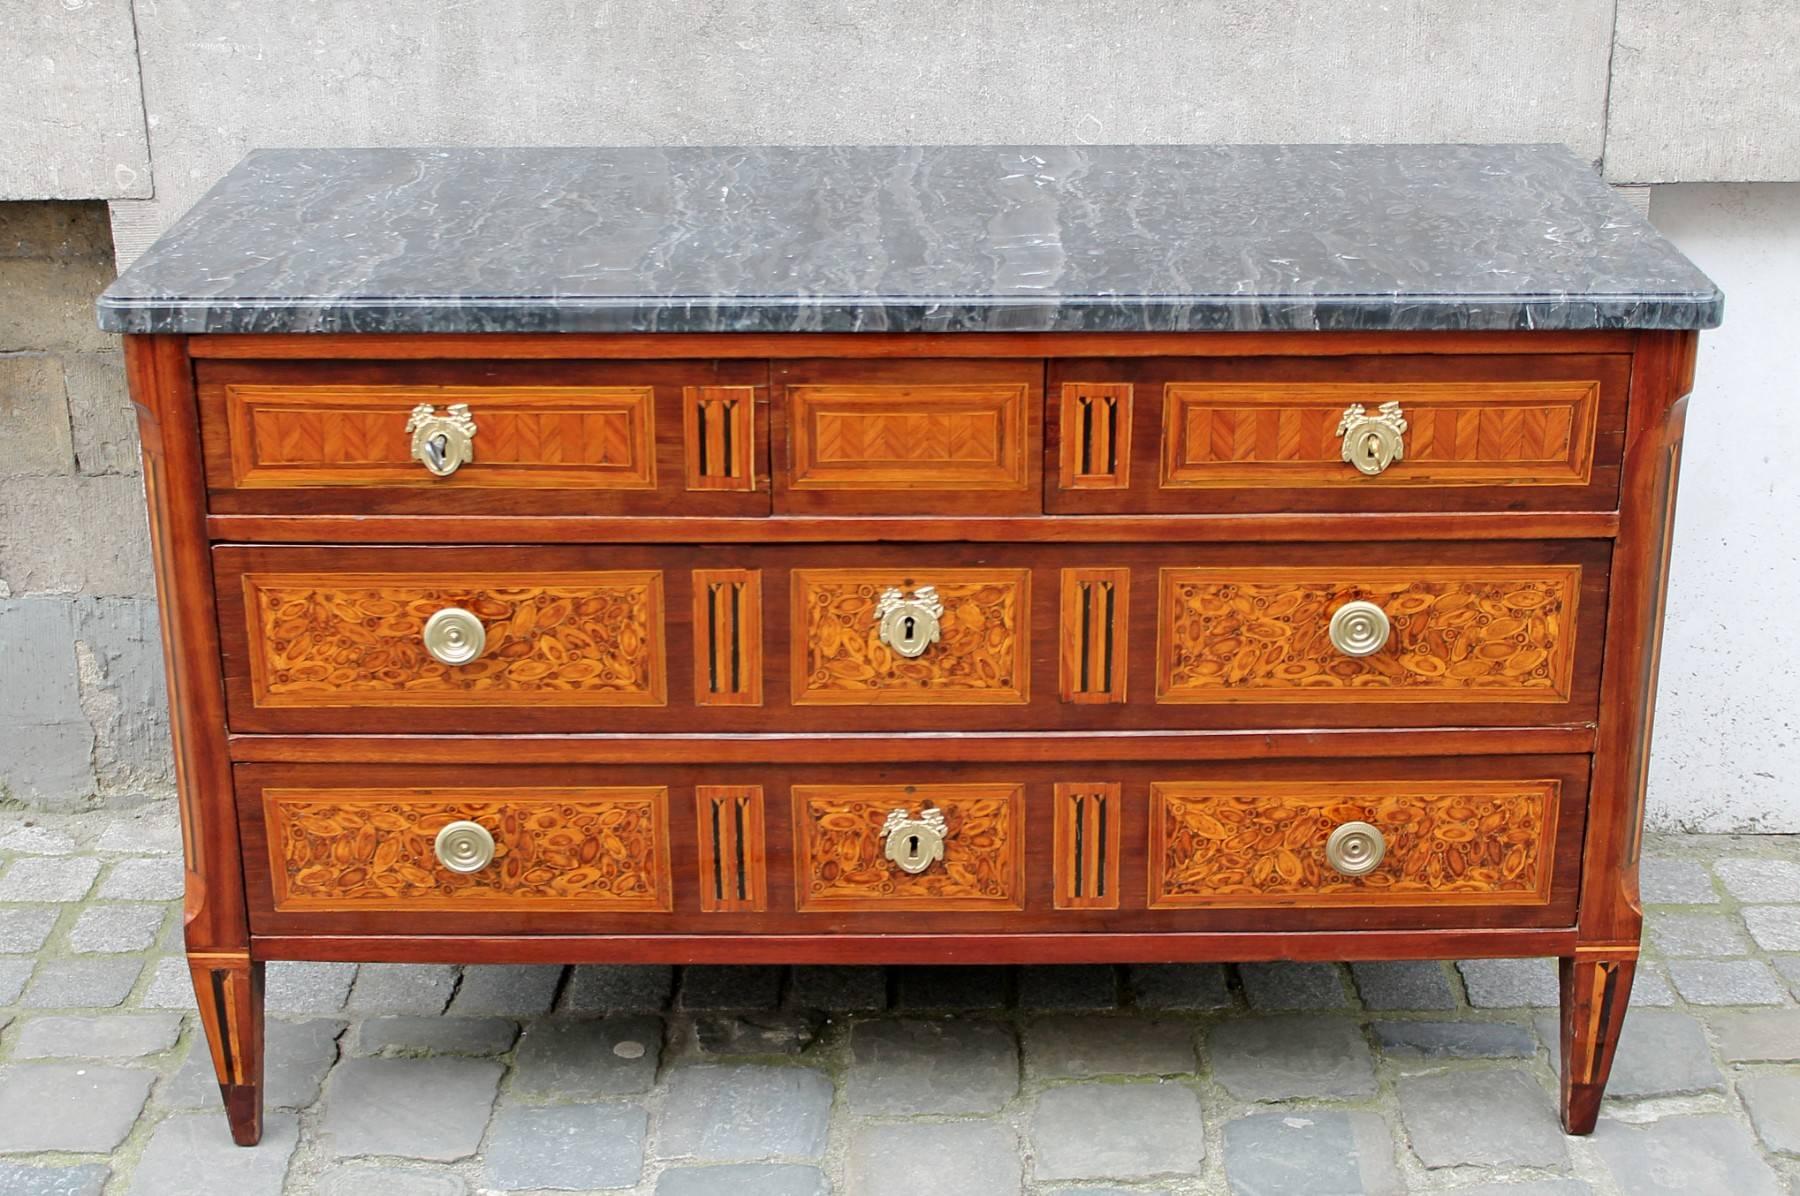 18th century French marquetry chest of drawers, stamped J. Chastel
The marble has been replaced.